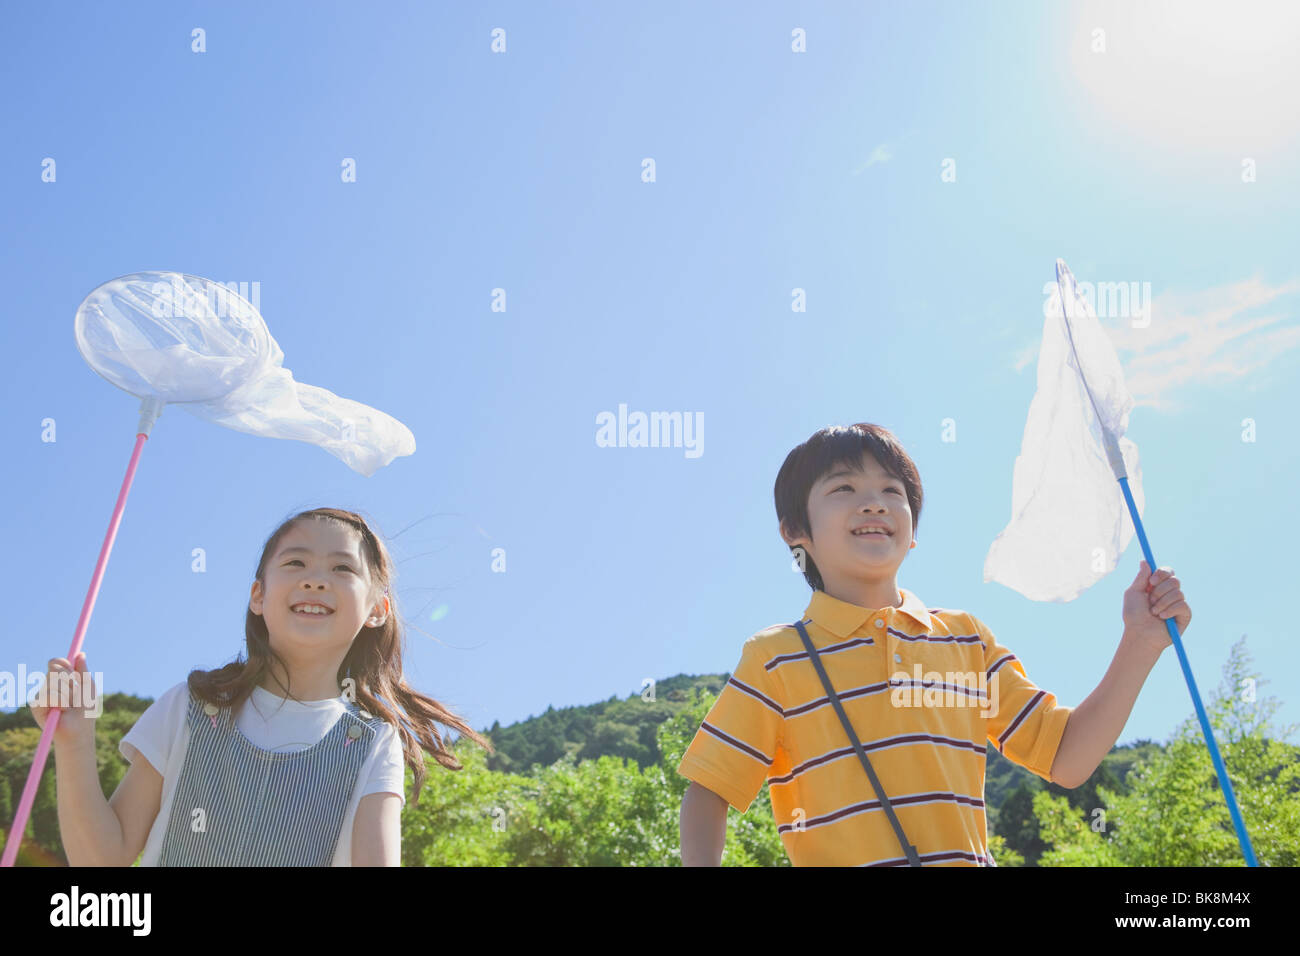 Boy and Girl Holding Butterfly Net Stock Photo